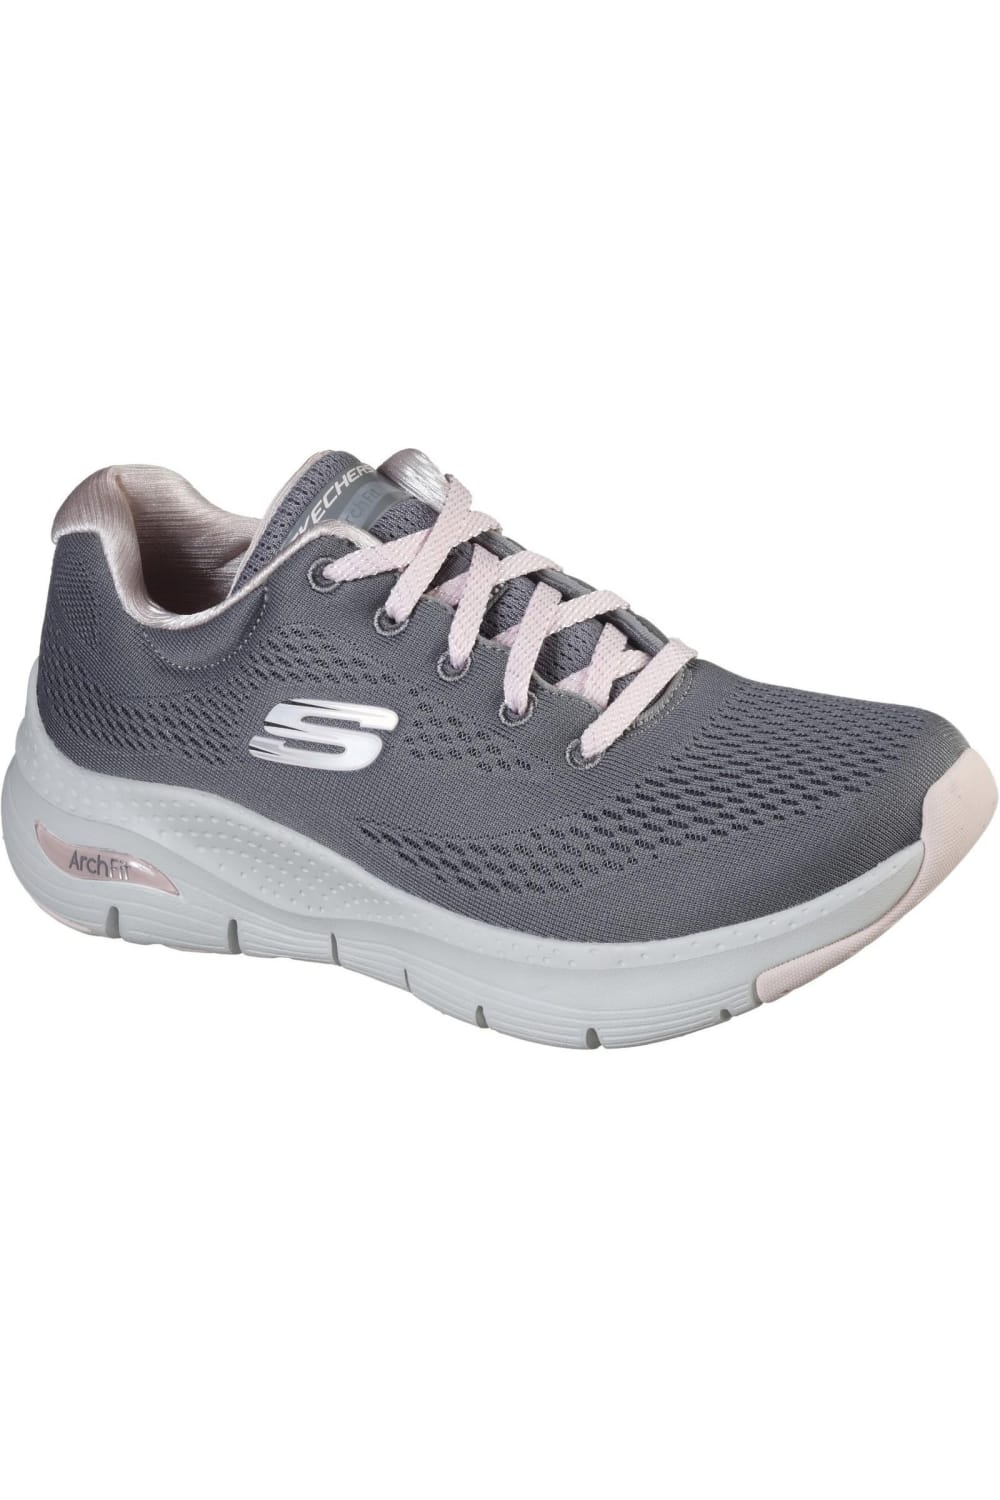 Womens/Ladies Arch Fit Sunny Outlook Sneaker - Gray/Pink